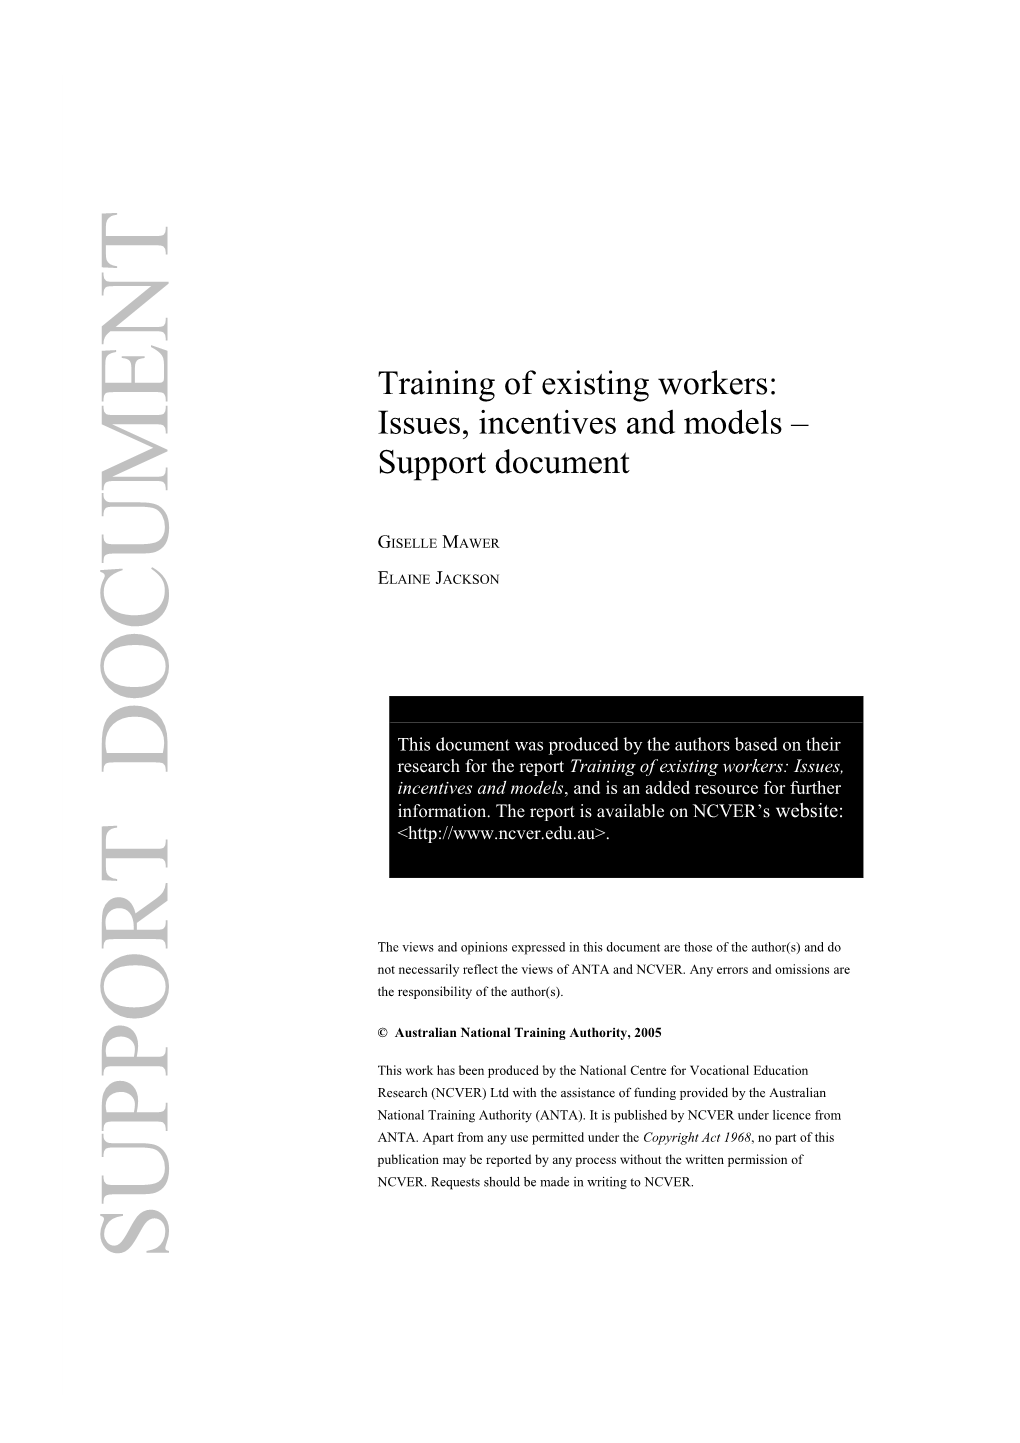 Training of Existing Workers Support Doc